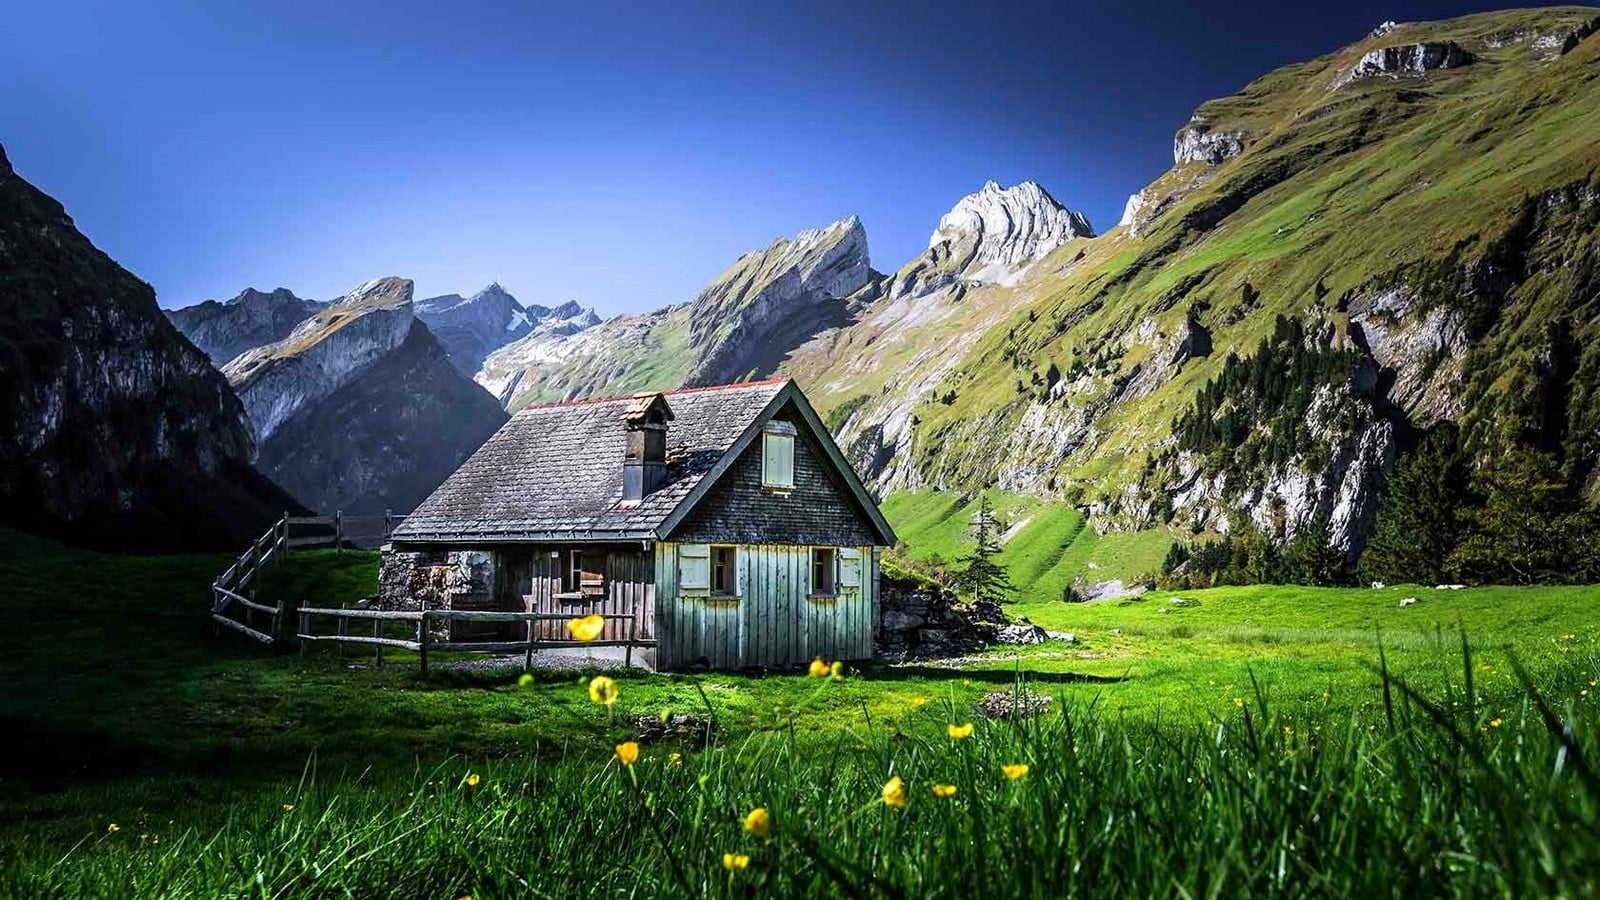 gray wooden house, nature, landscape, cabin, mountains, grass